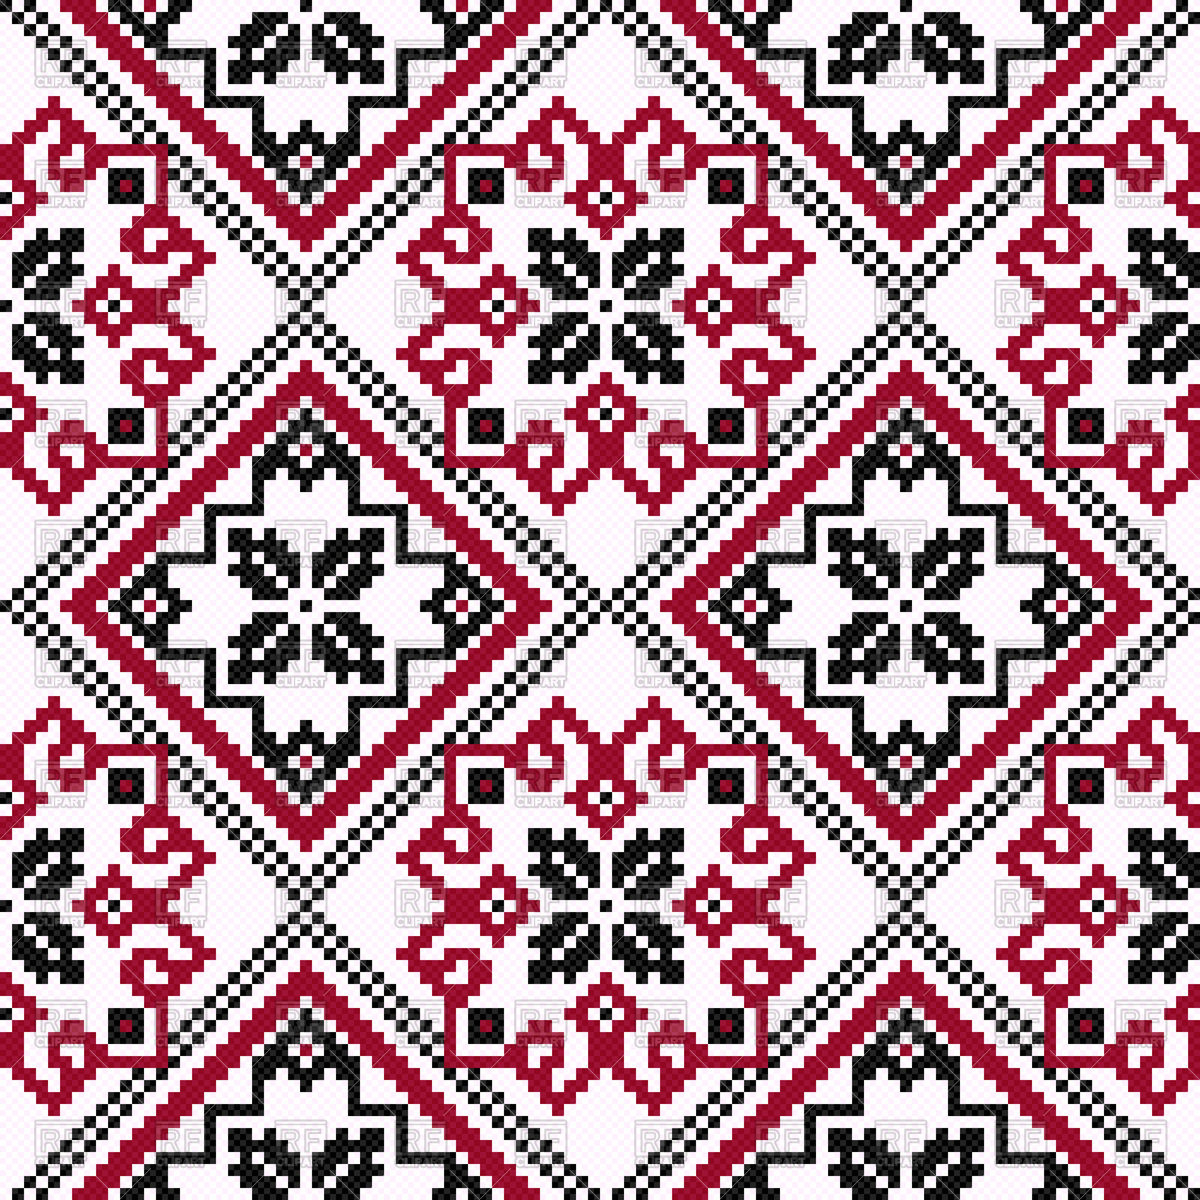 Ukrainian Embroidery Patterns Ethnic Ukrainian Geometric Embroidery In Hues Of Black And Red On The Light Pink Background Stock Vector Image